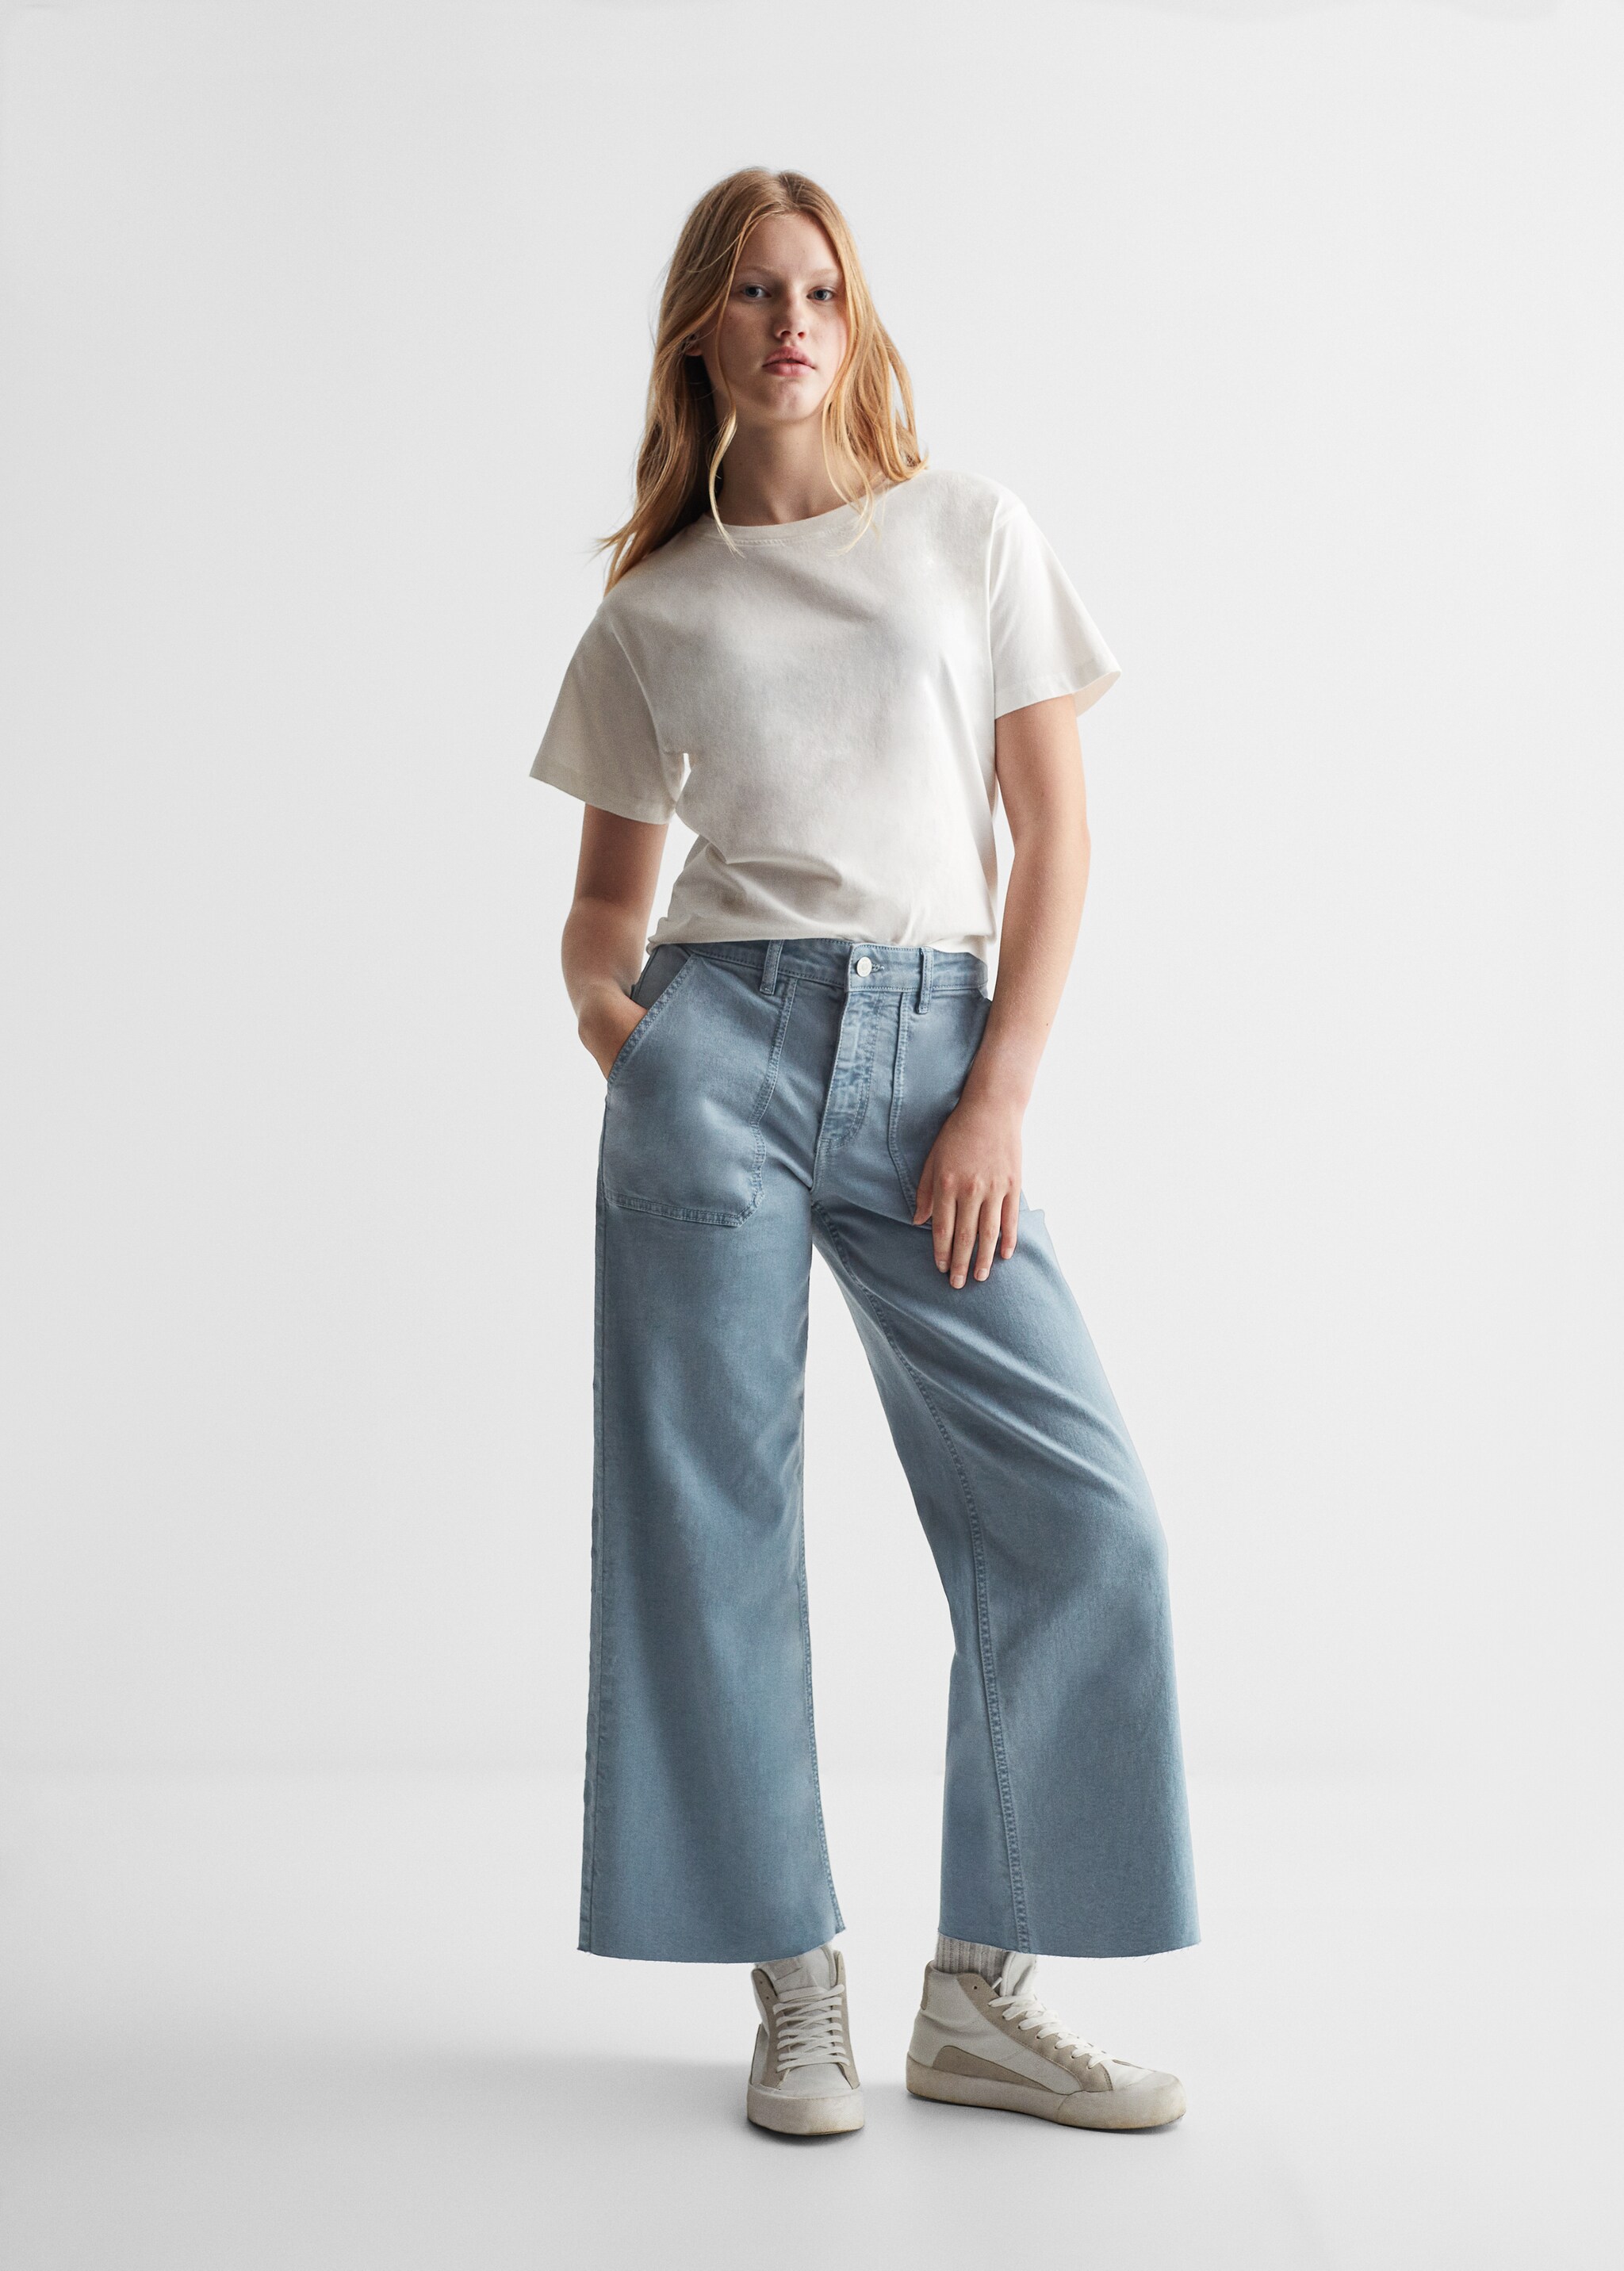 Culotte jeans with pockets - Details of the article 1